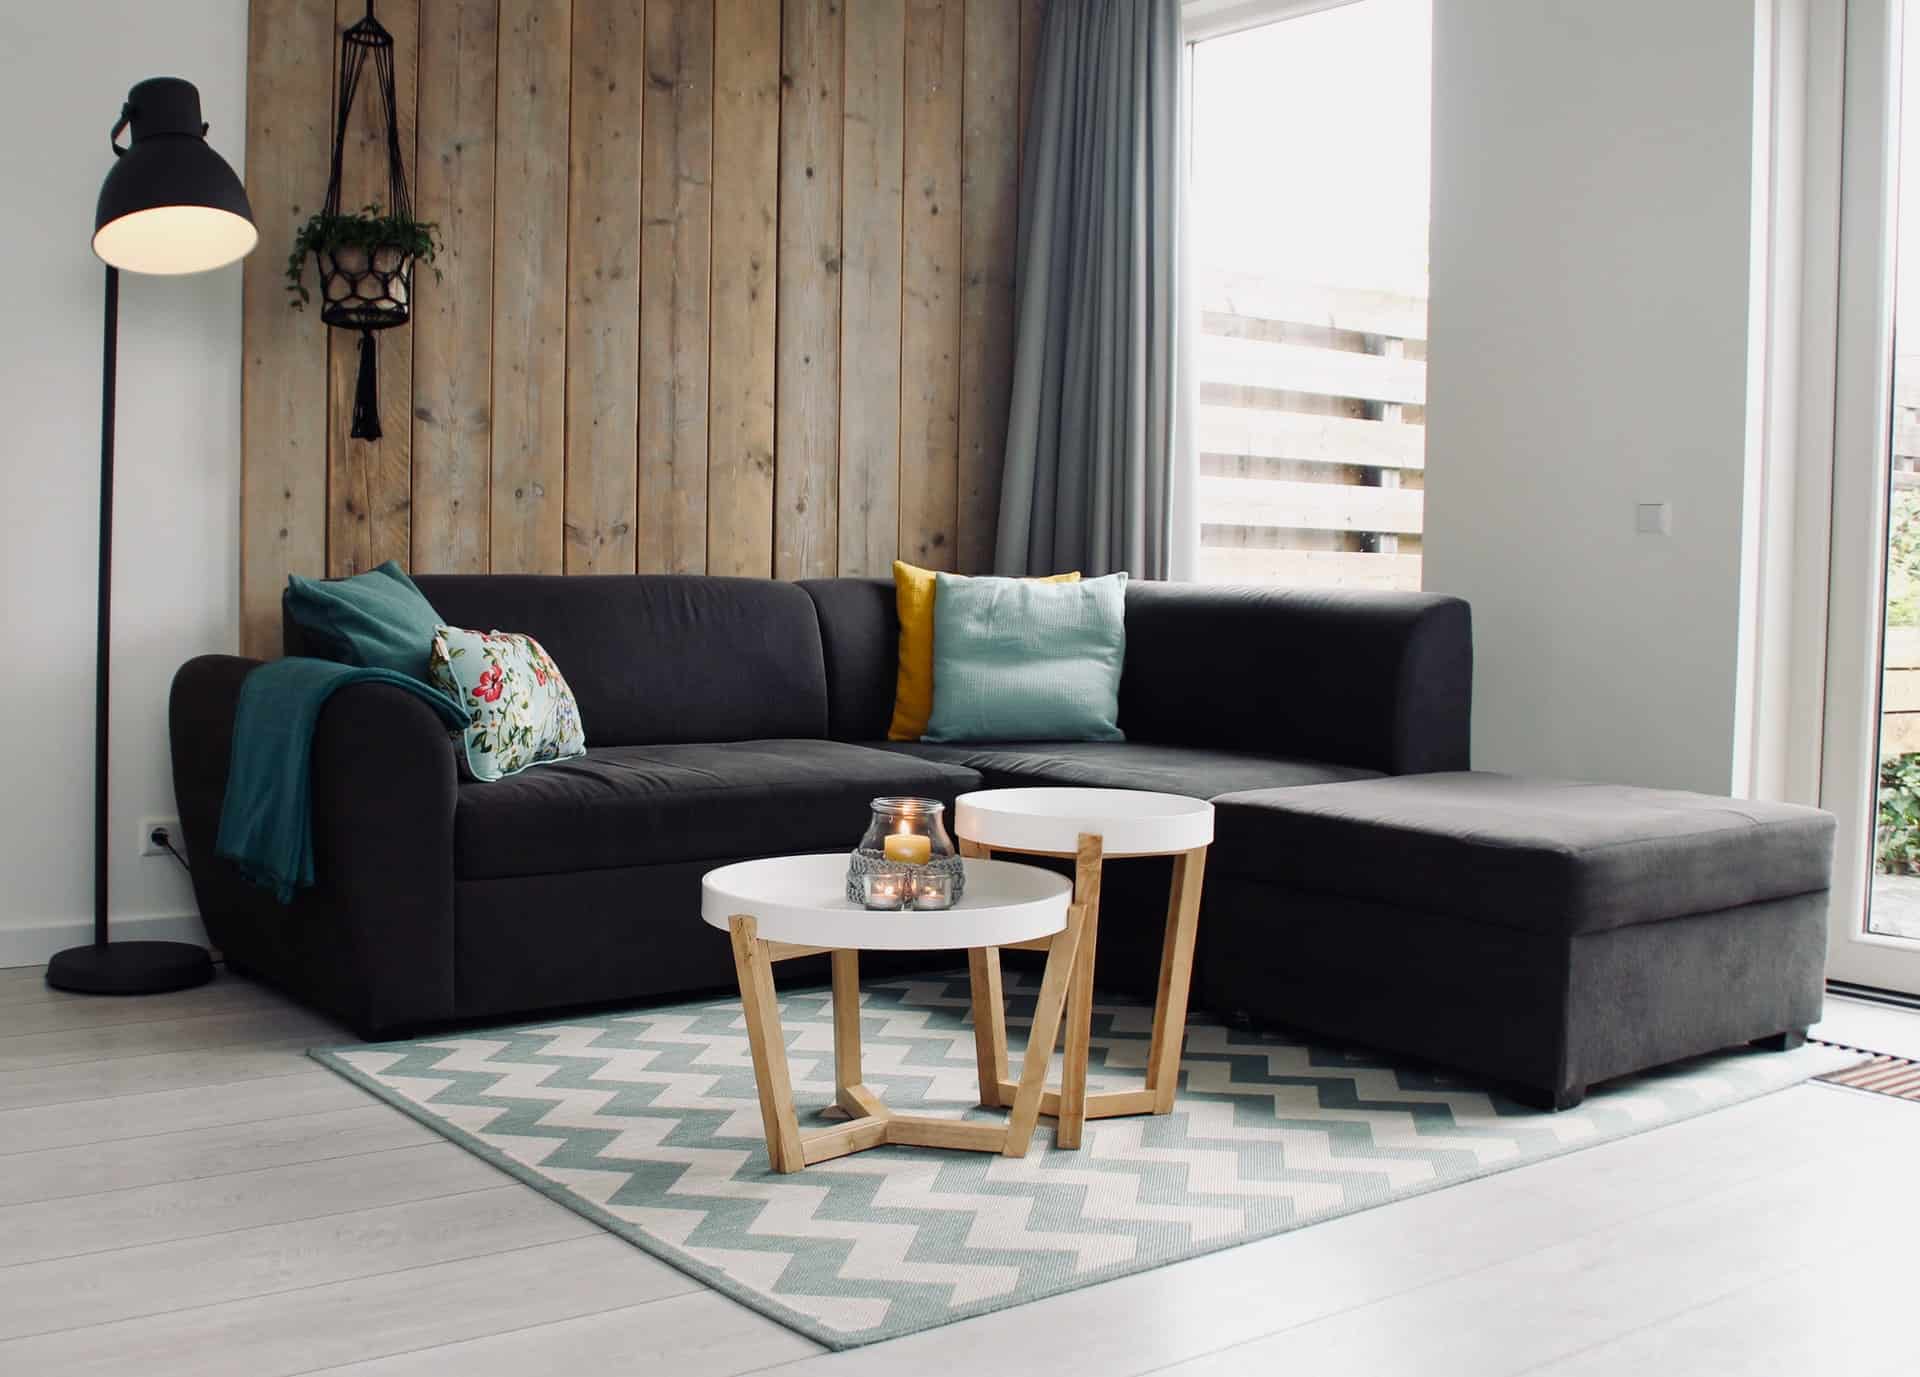 Sofa for living room – what to look for when buying?